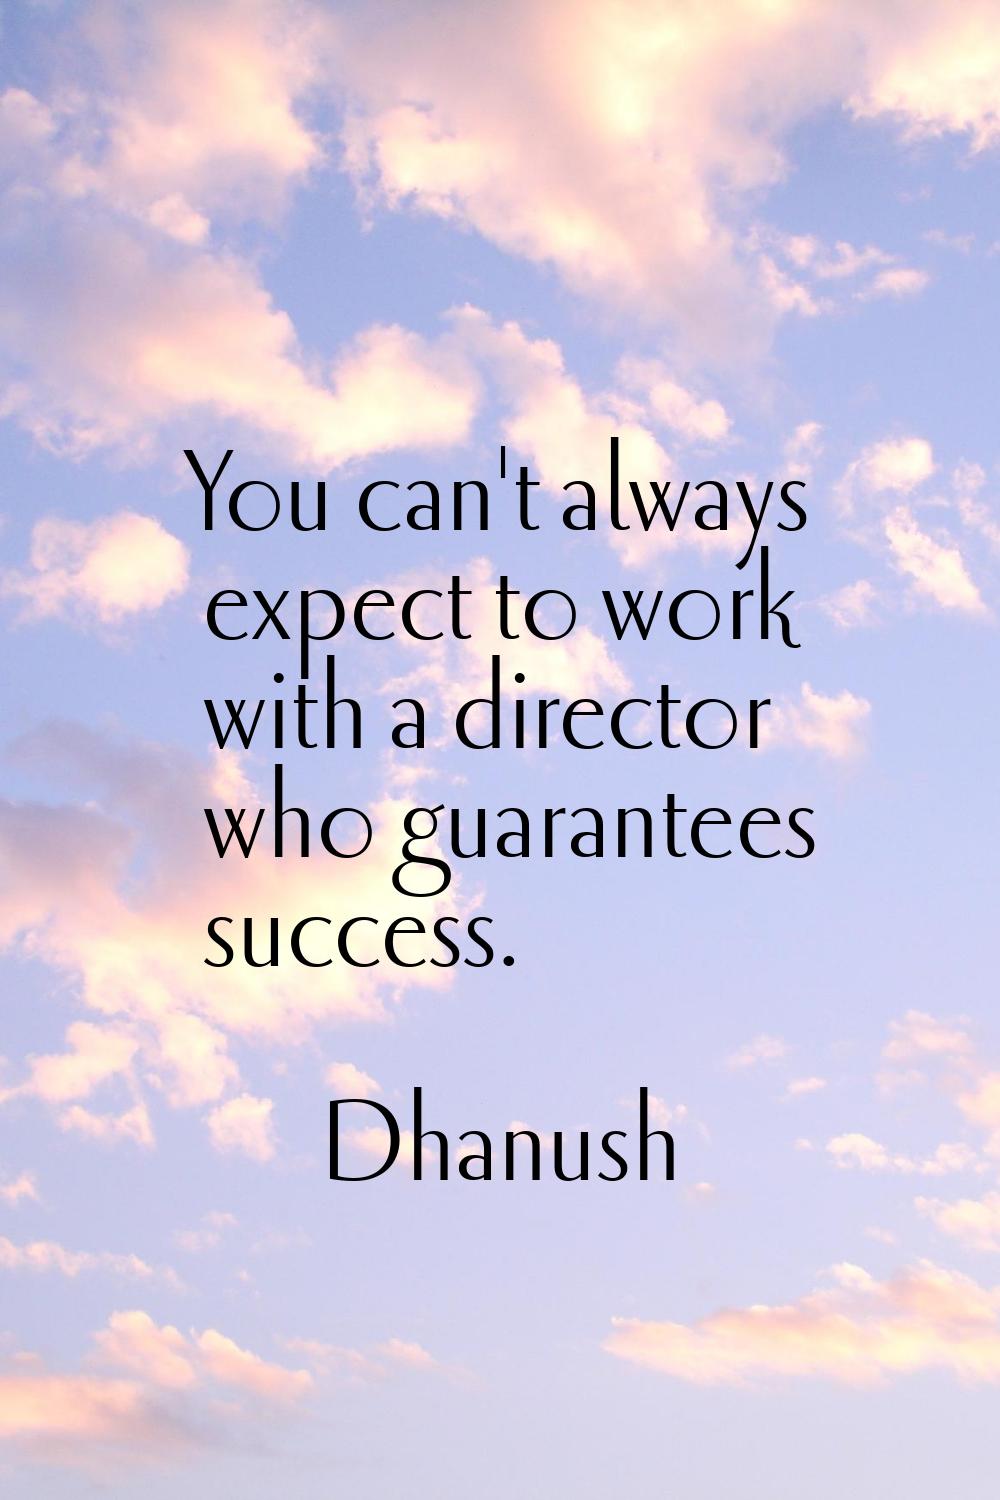 You can't always expect to work with a director who guarantees success.